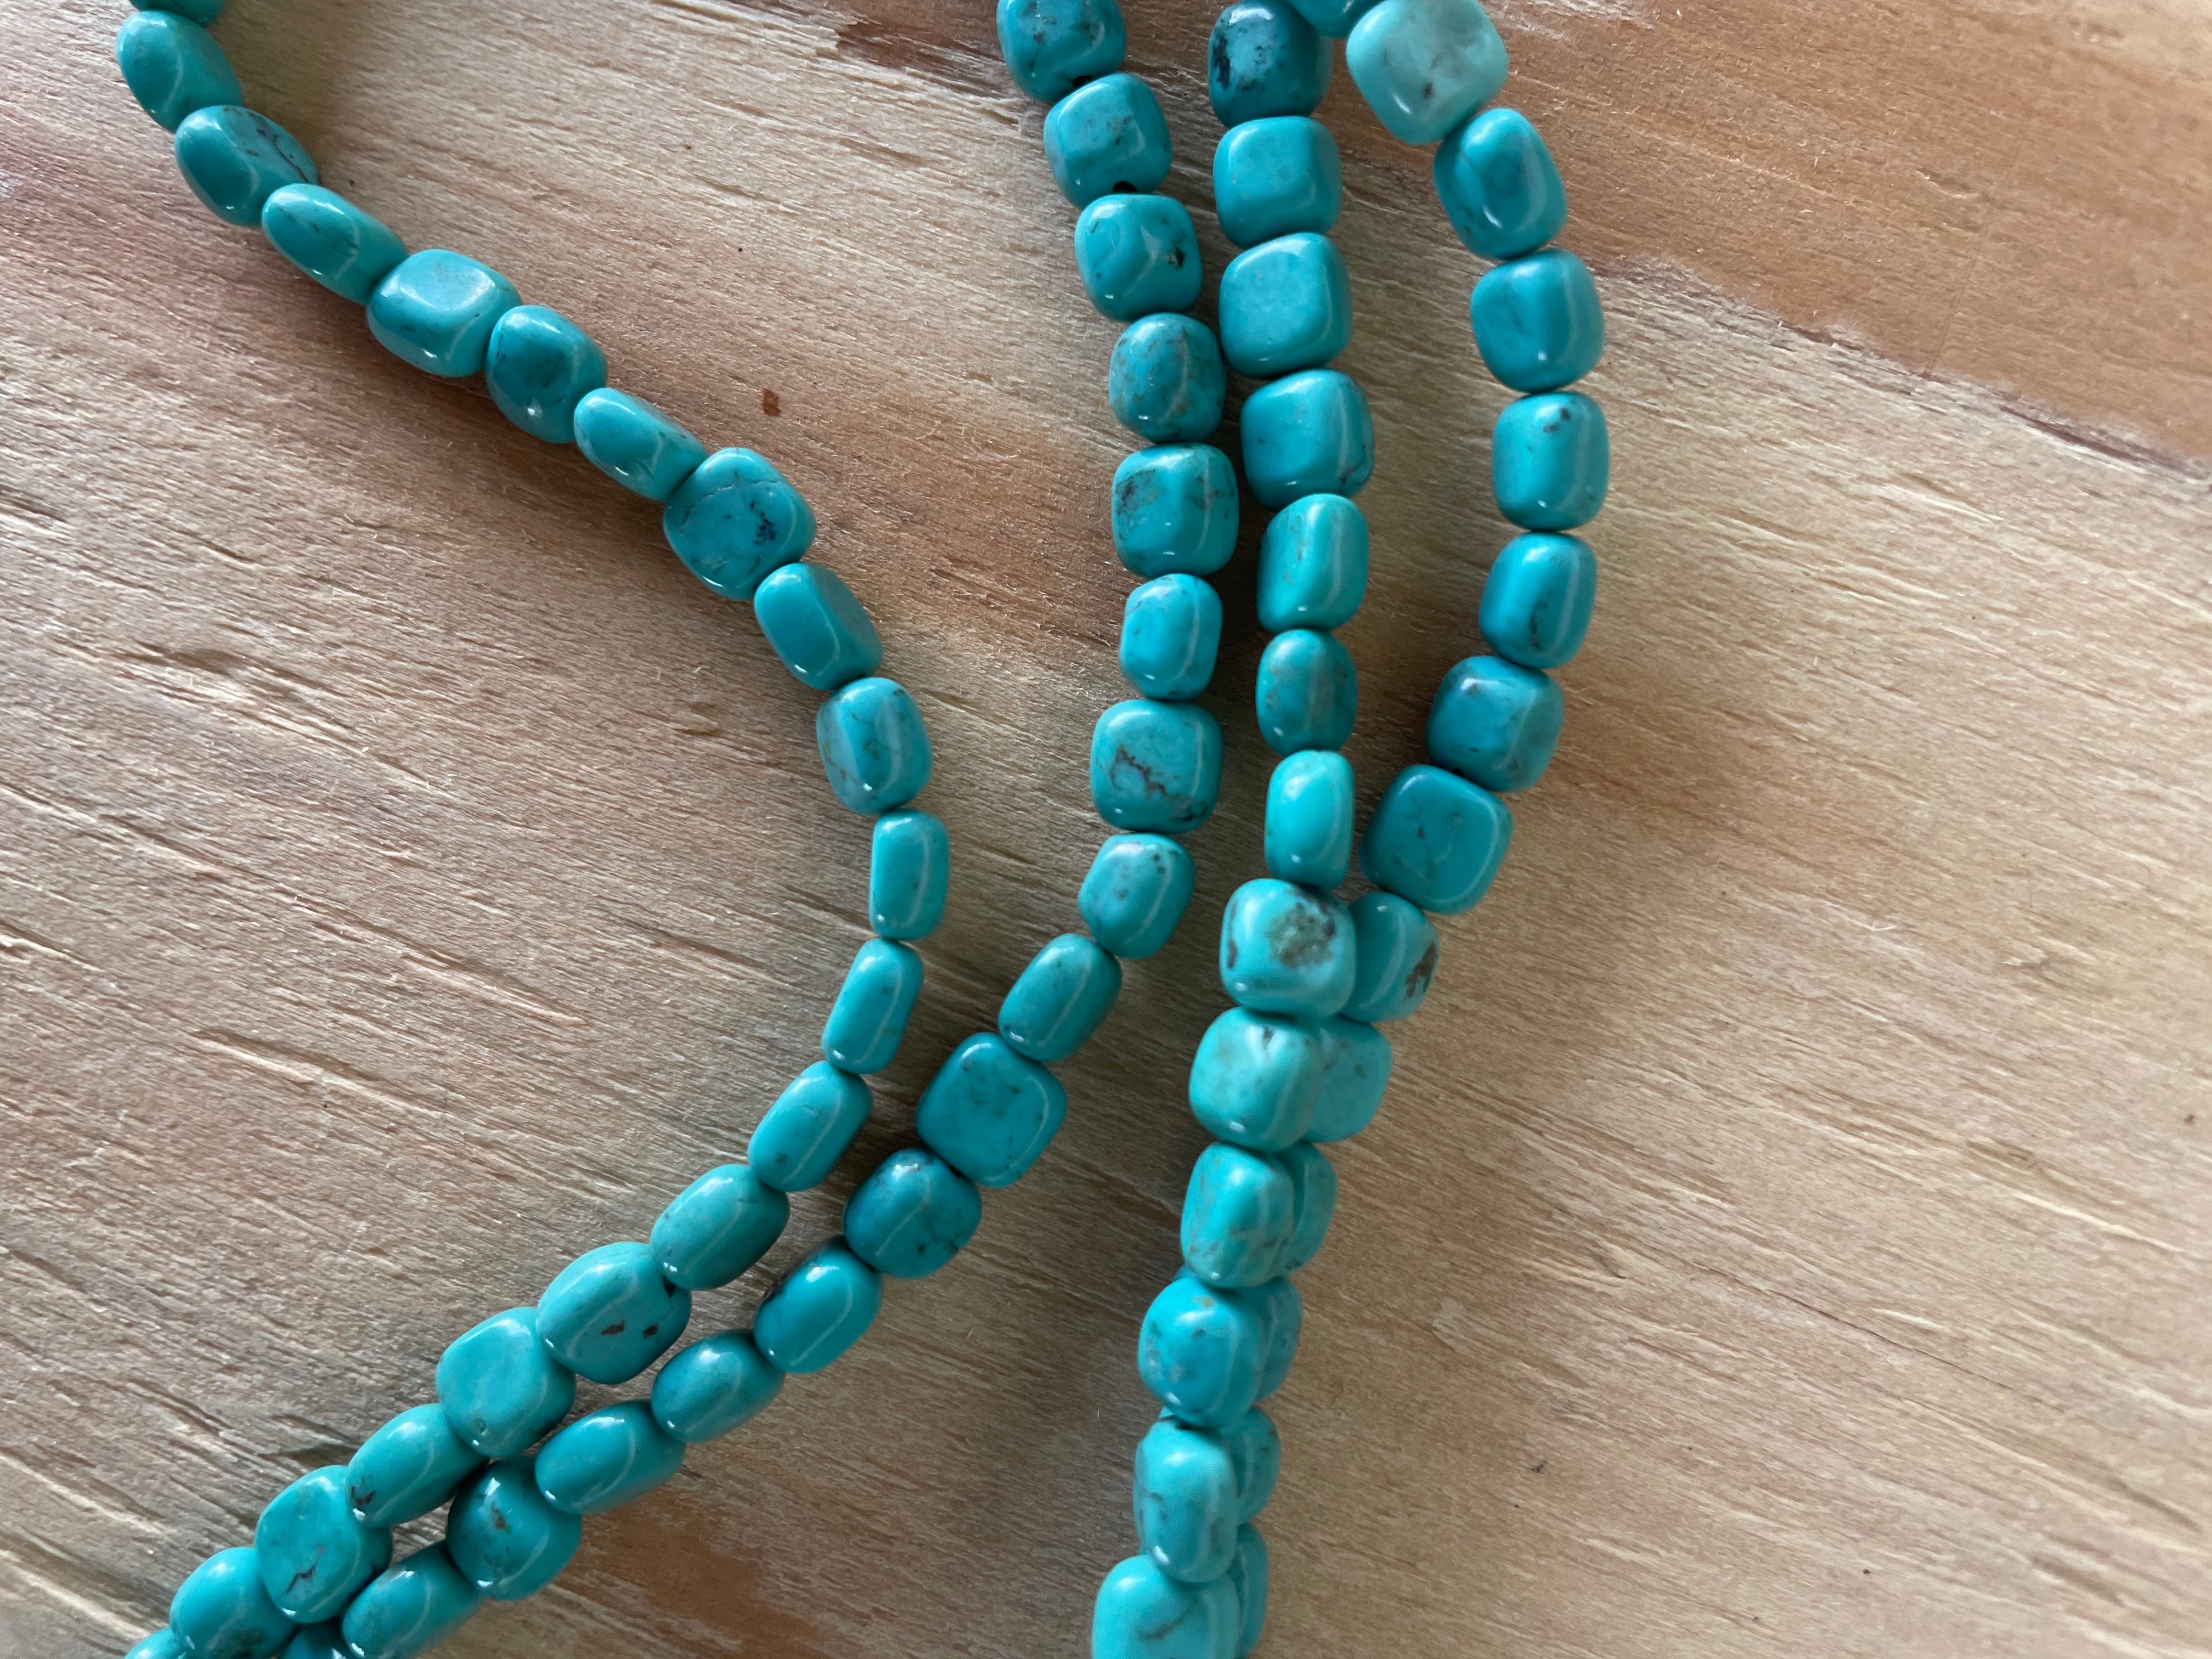 Turquoise Square Stone Necklace